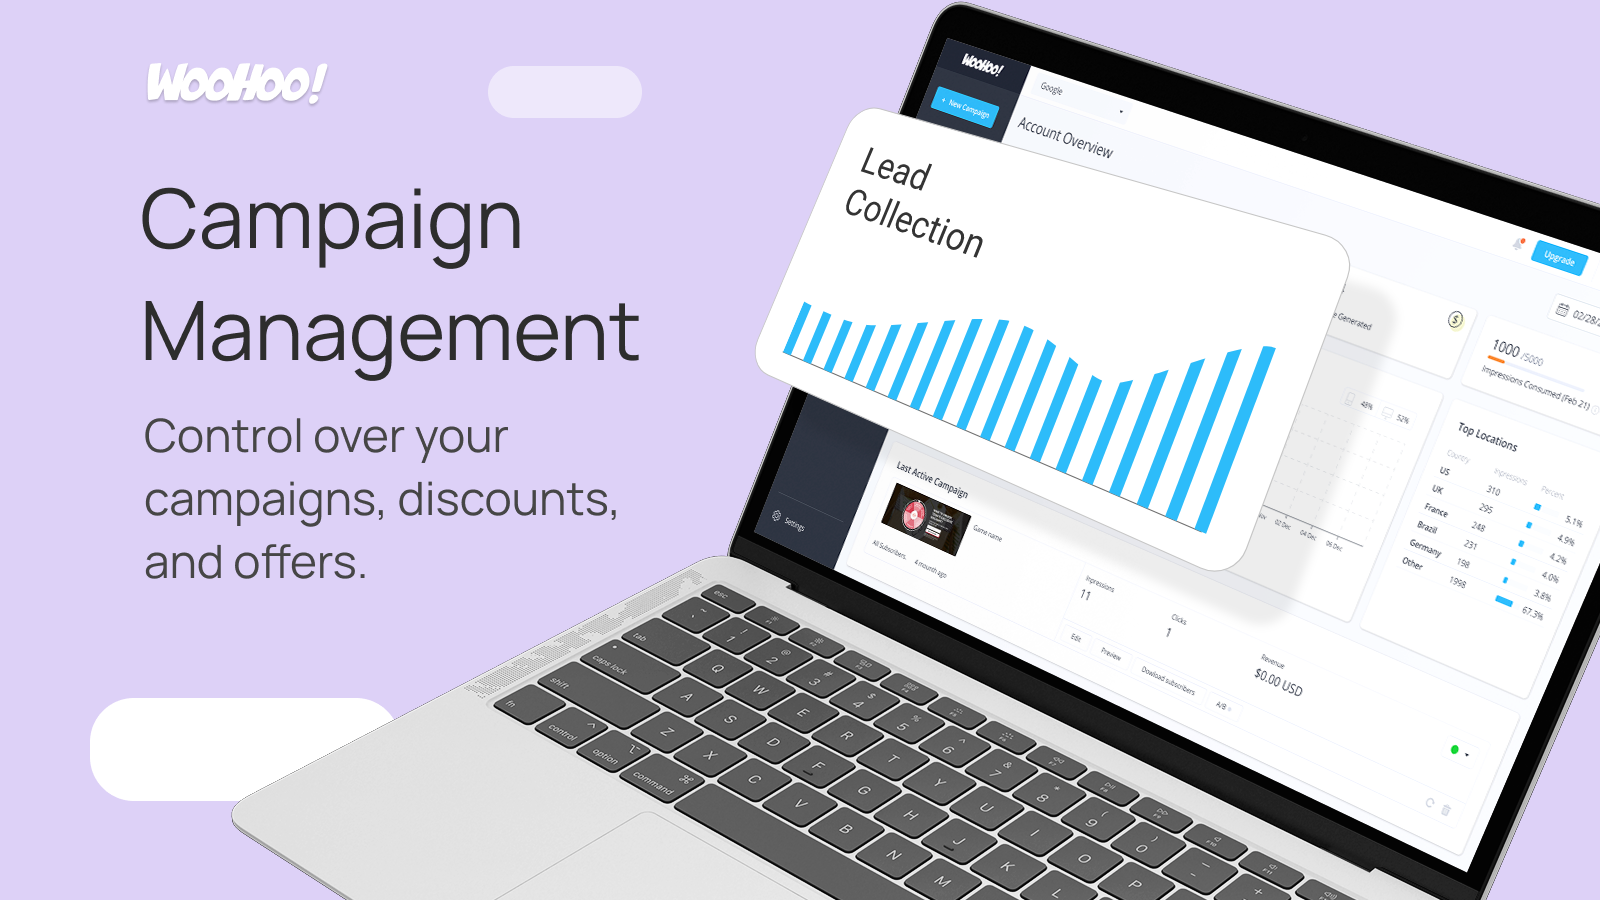 Set coupon codes and target key audience segments with coupons